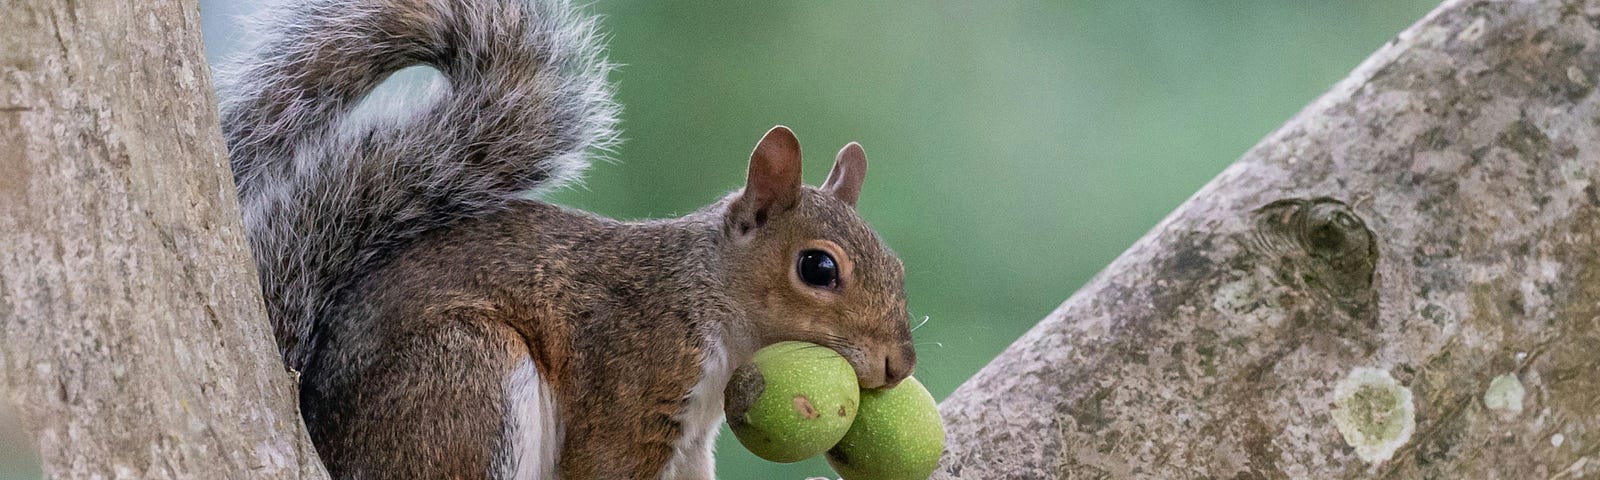 Squirrel with two nuts in mouth